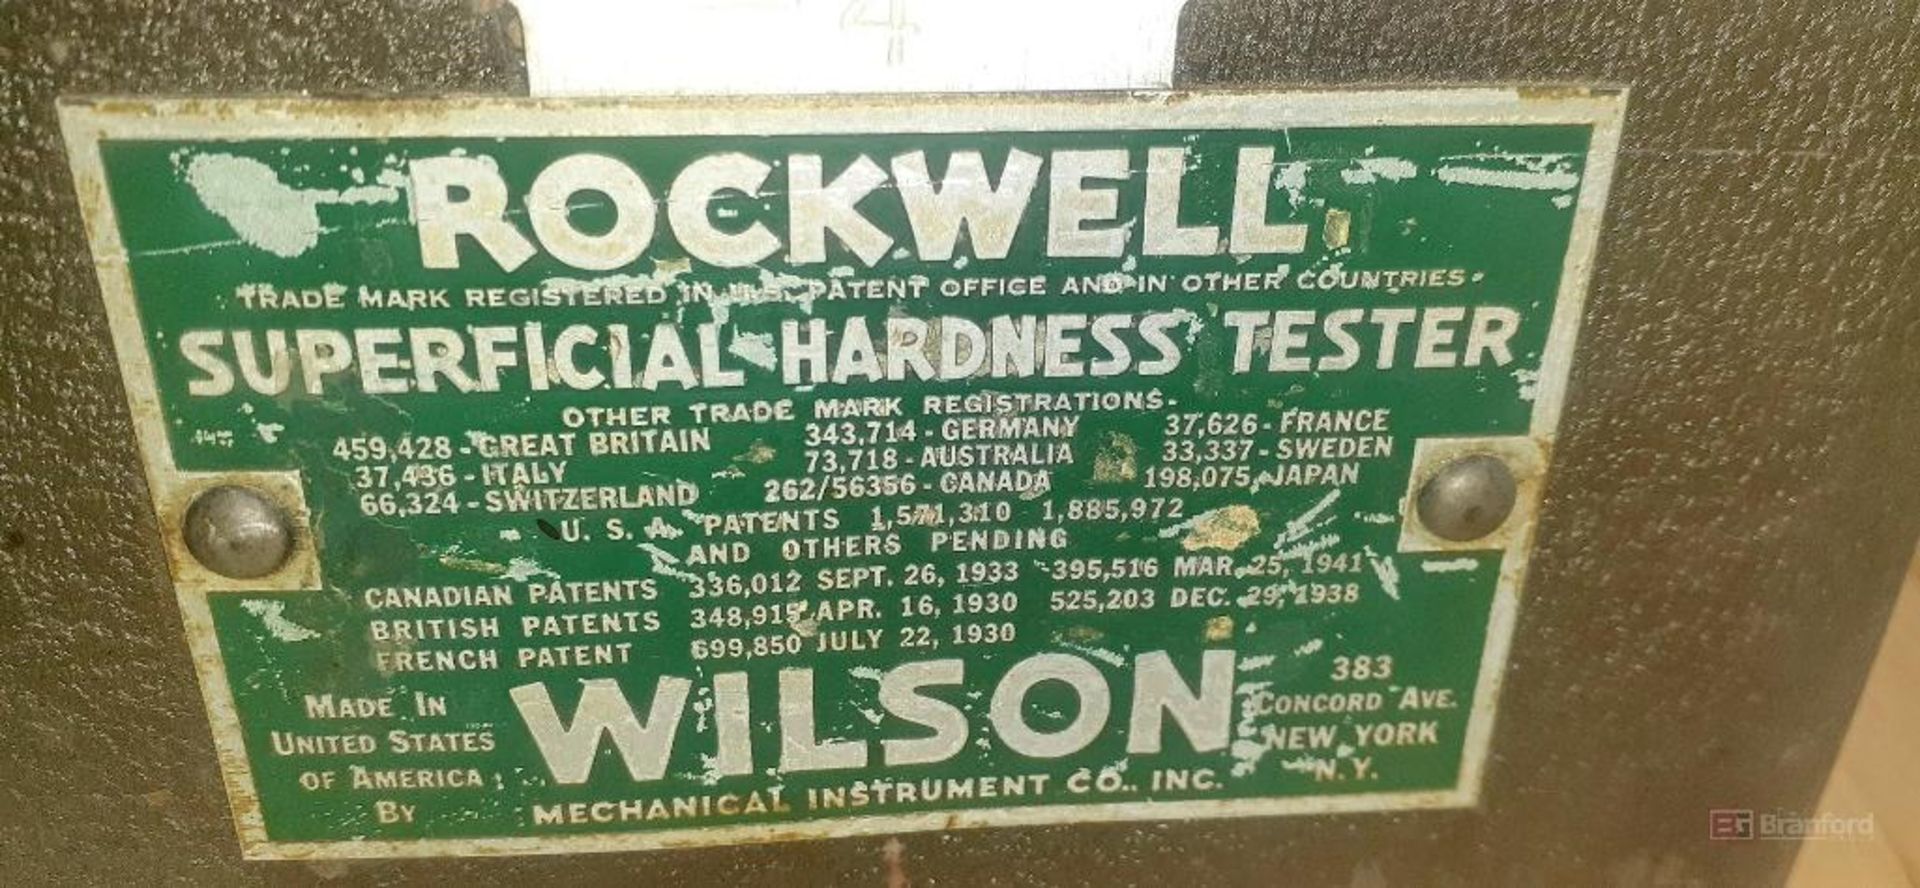 Rockwell Superficial Hardness Tester - Image 5 of 5